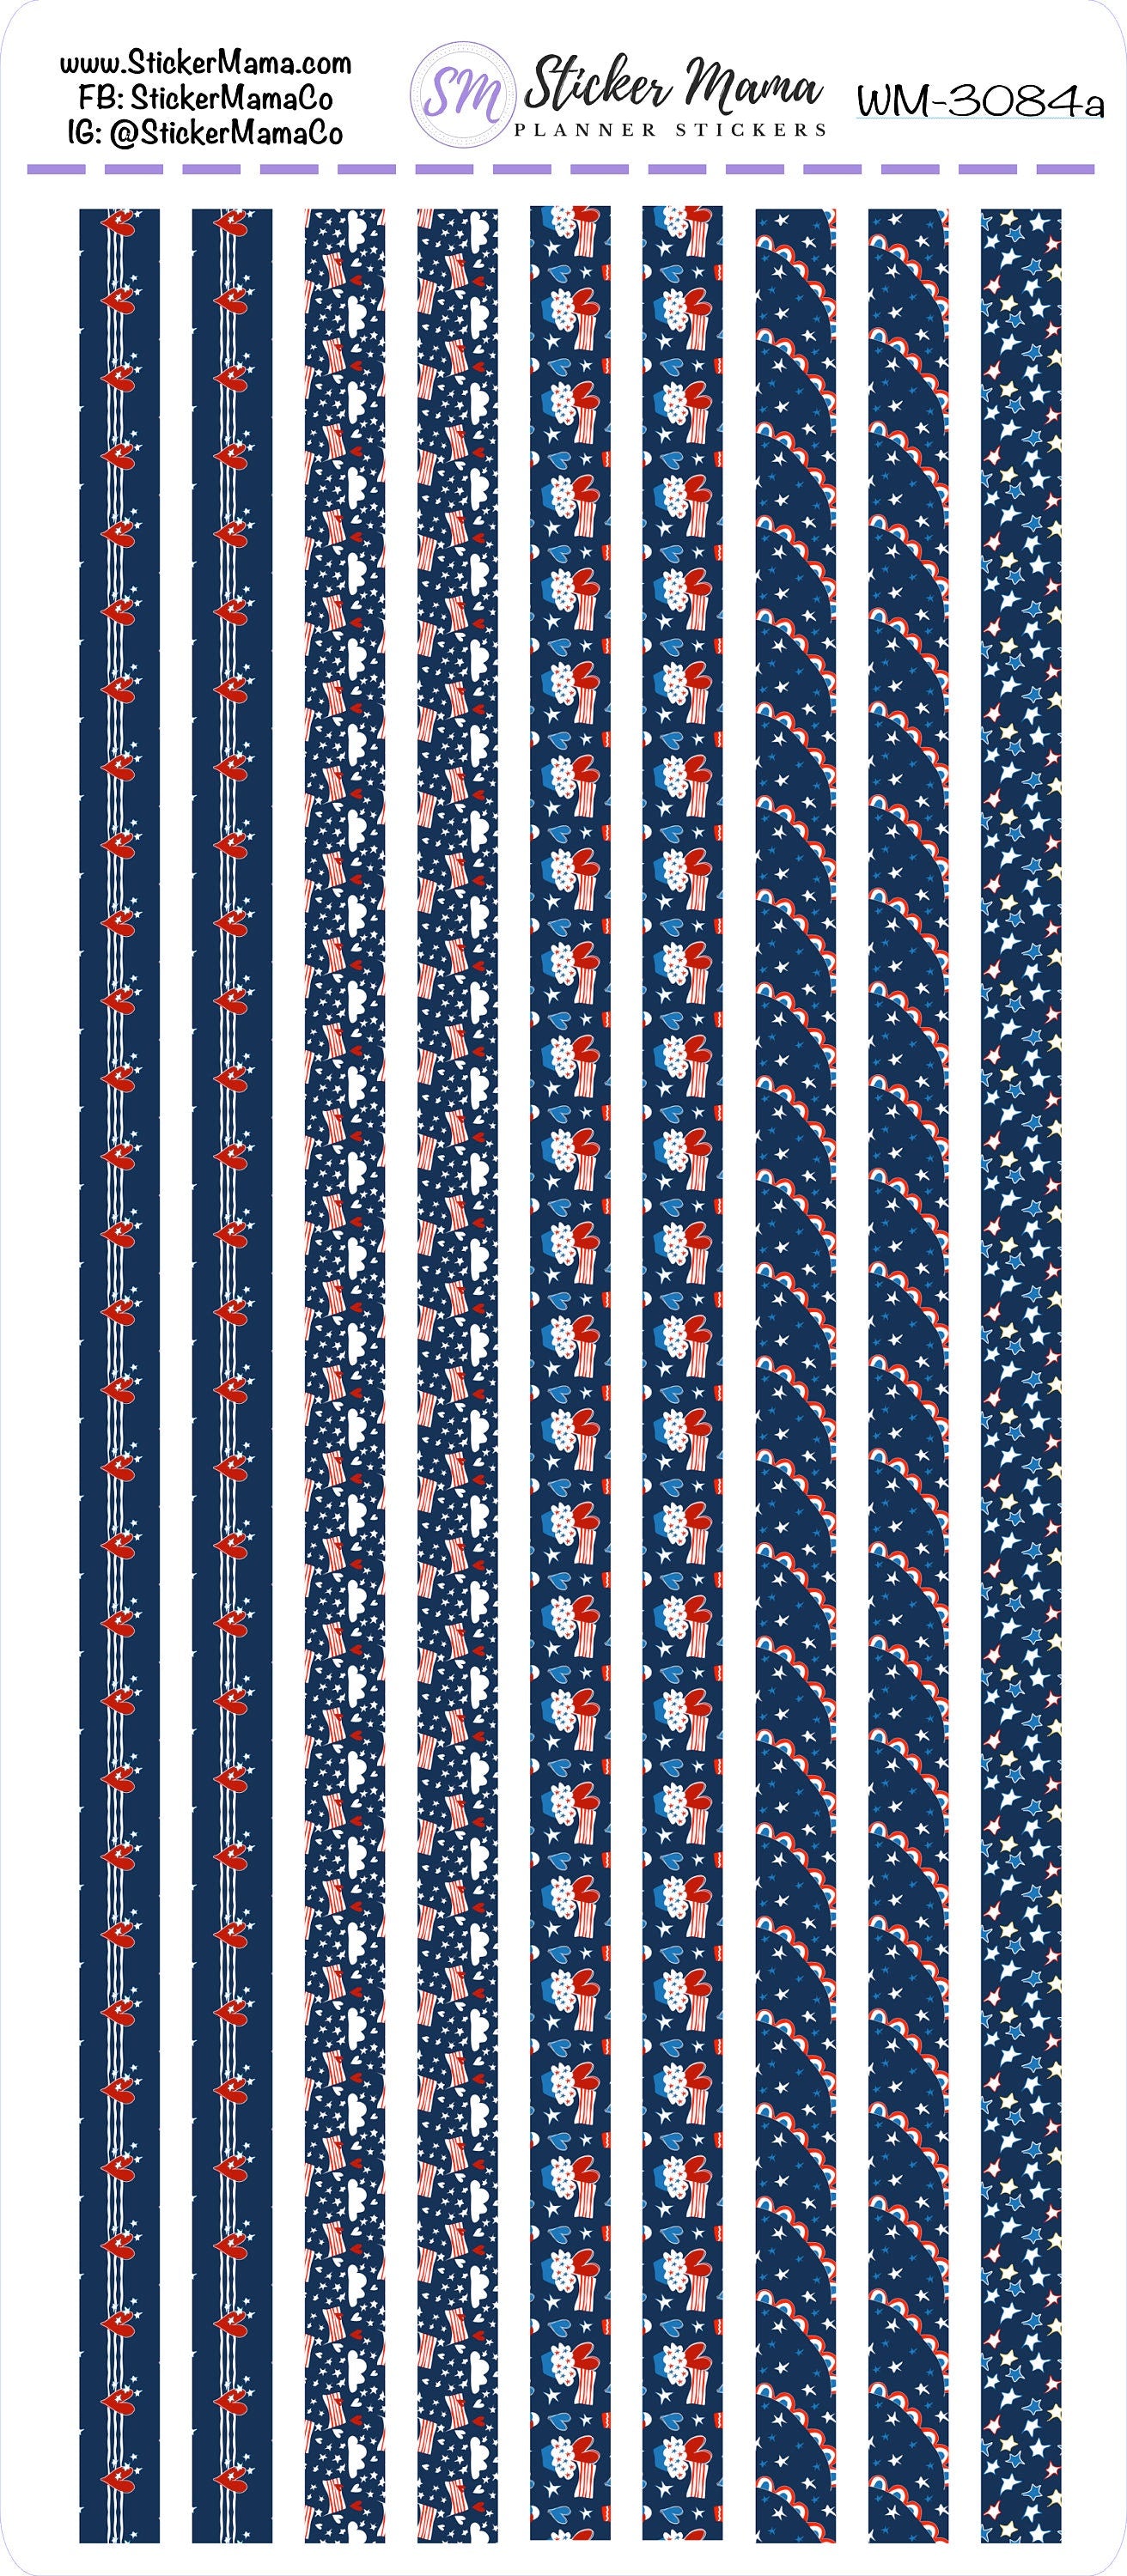 W-3084 - WASHI STICKERS - 4th of July - Planner Stickers - Washi for Planners